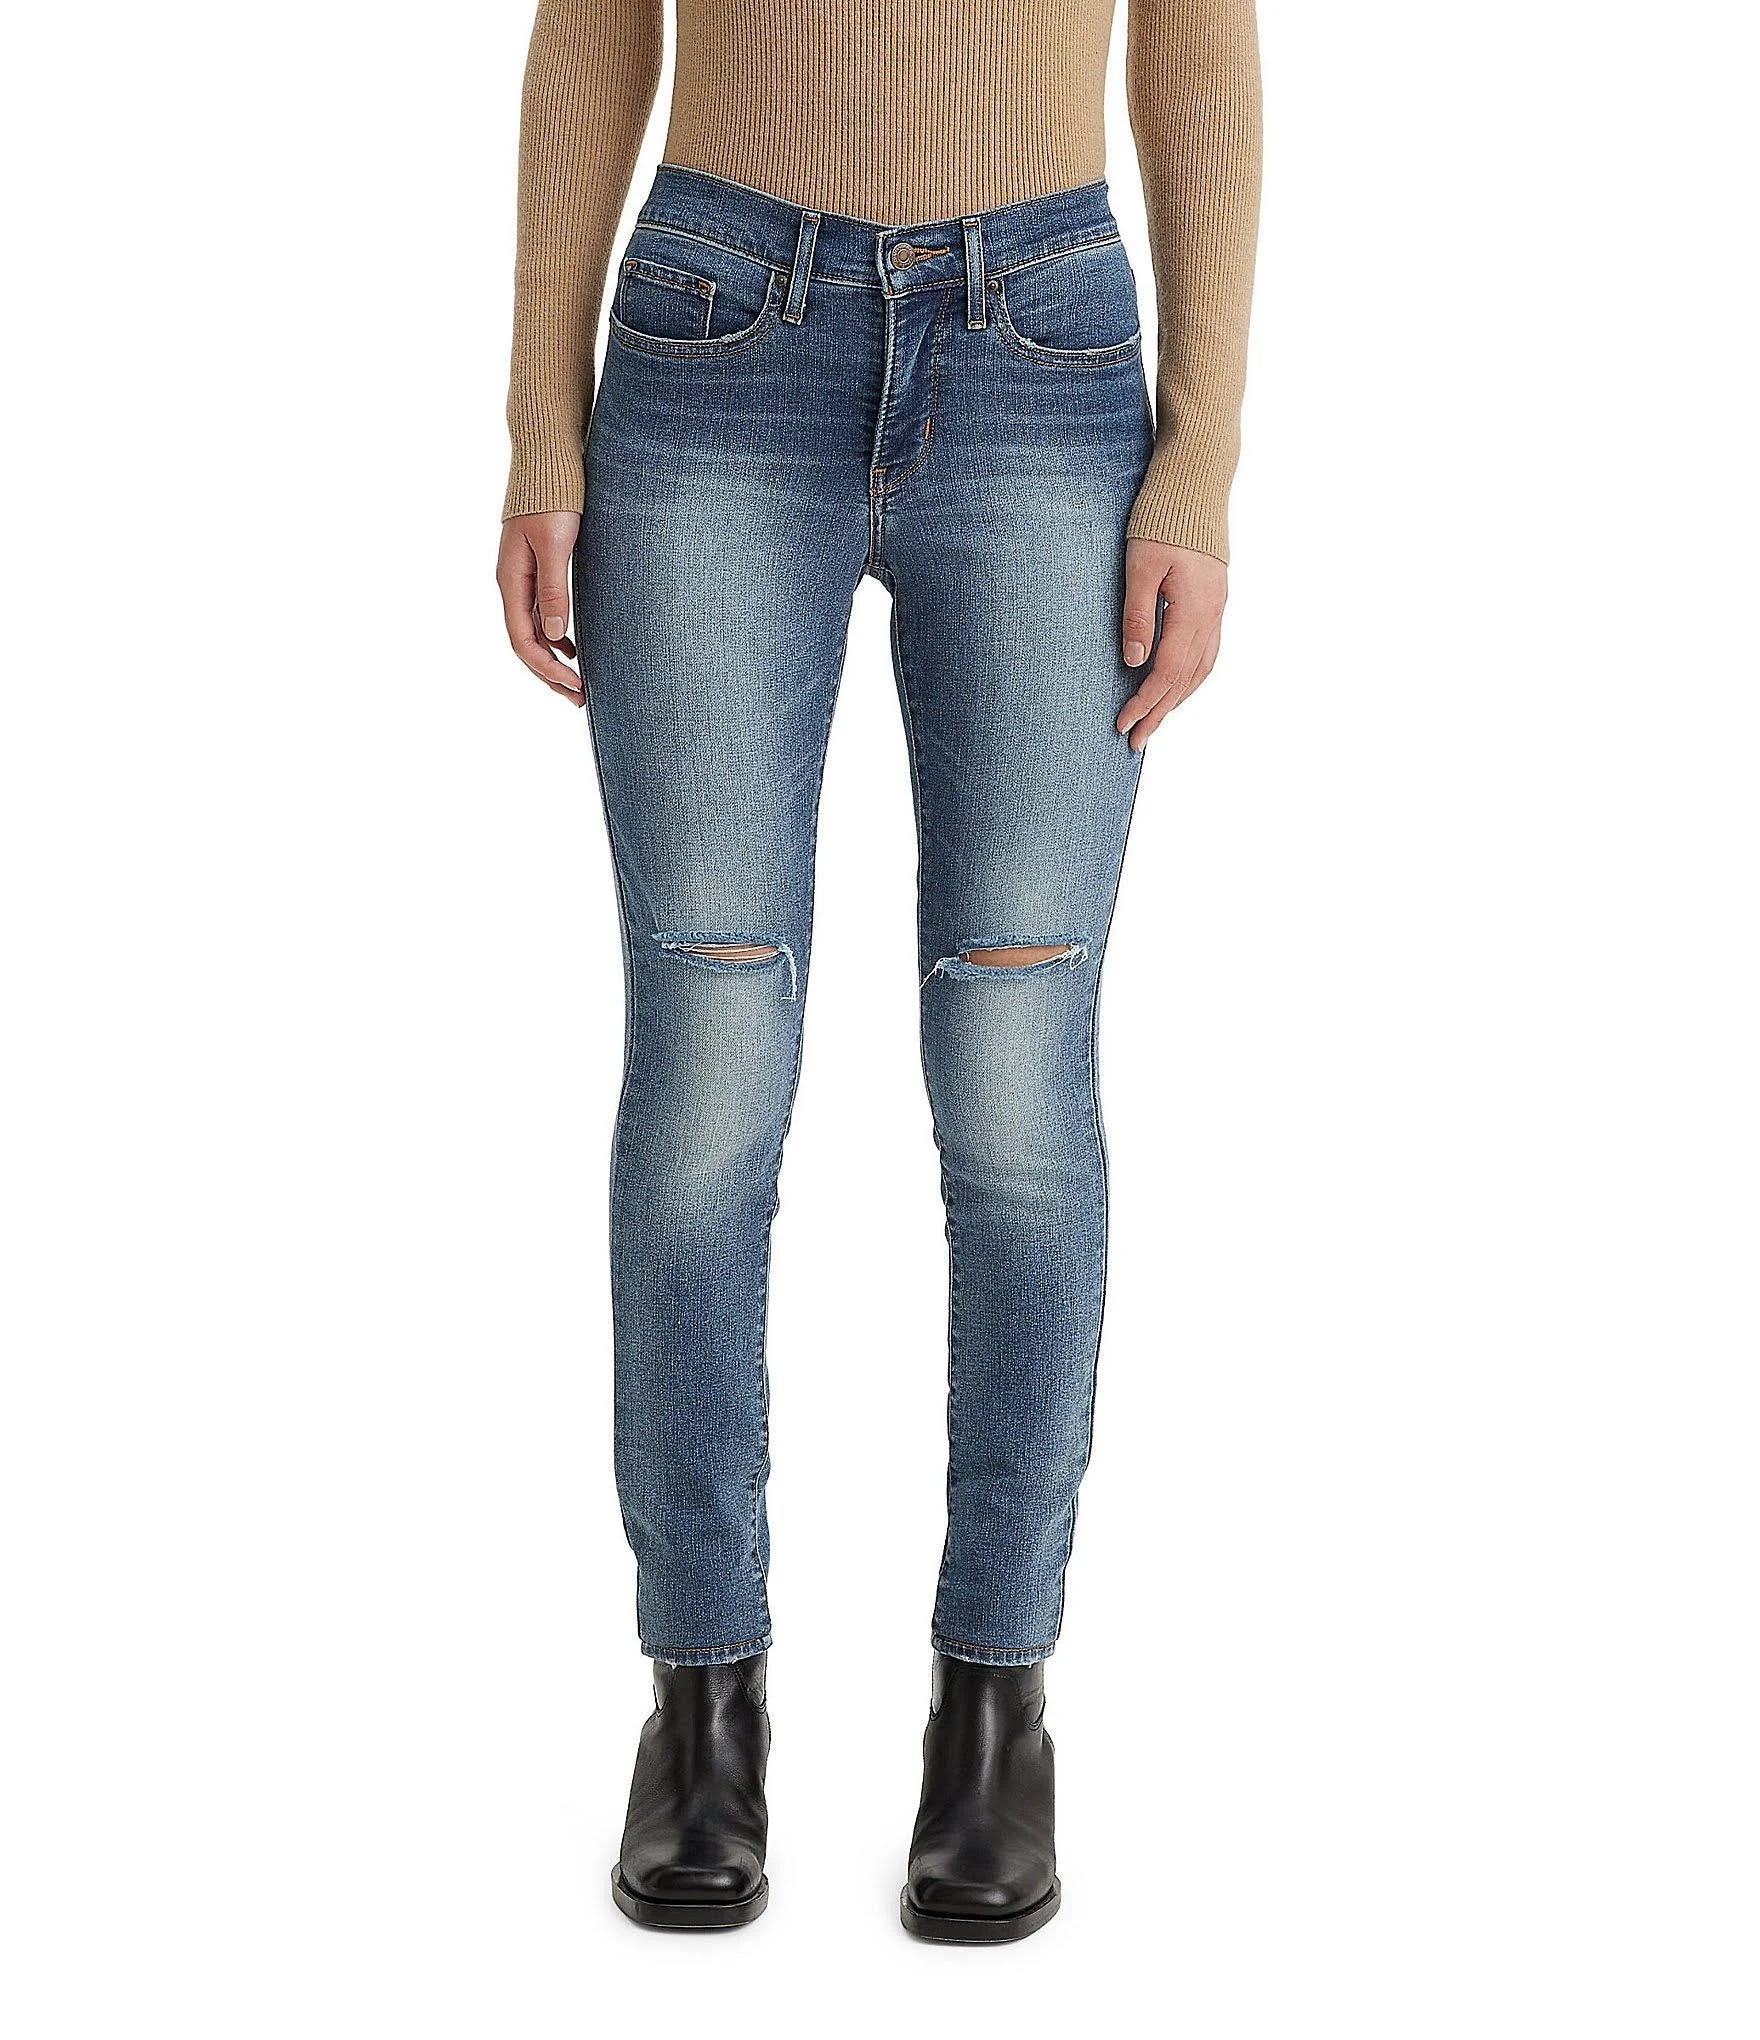 Stretchy Skinny Jeans for a Flattering Fit | Image